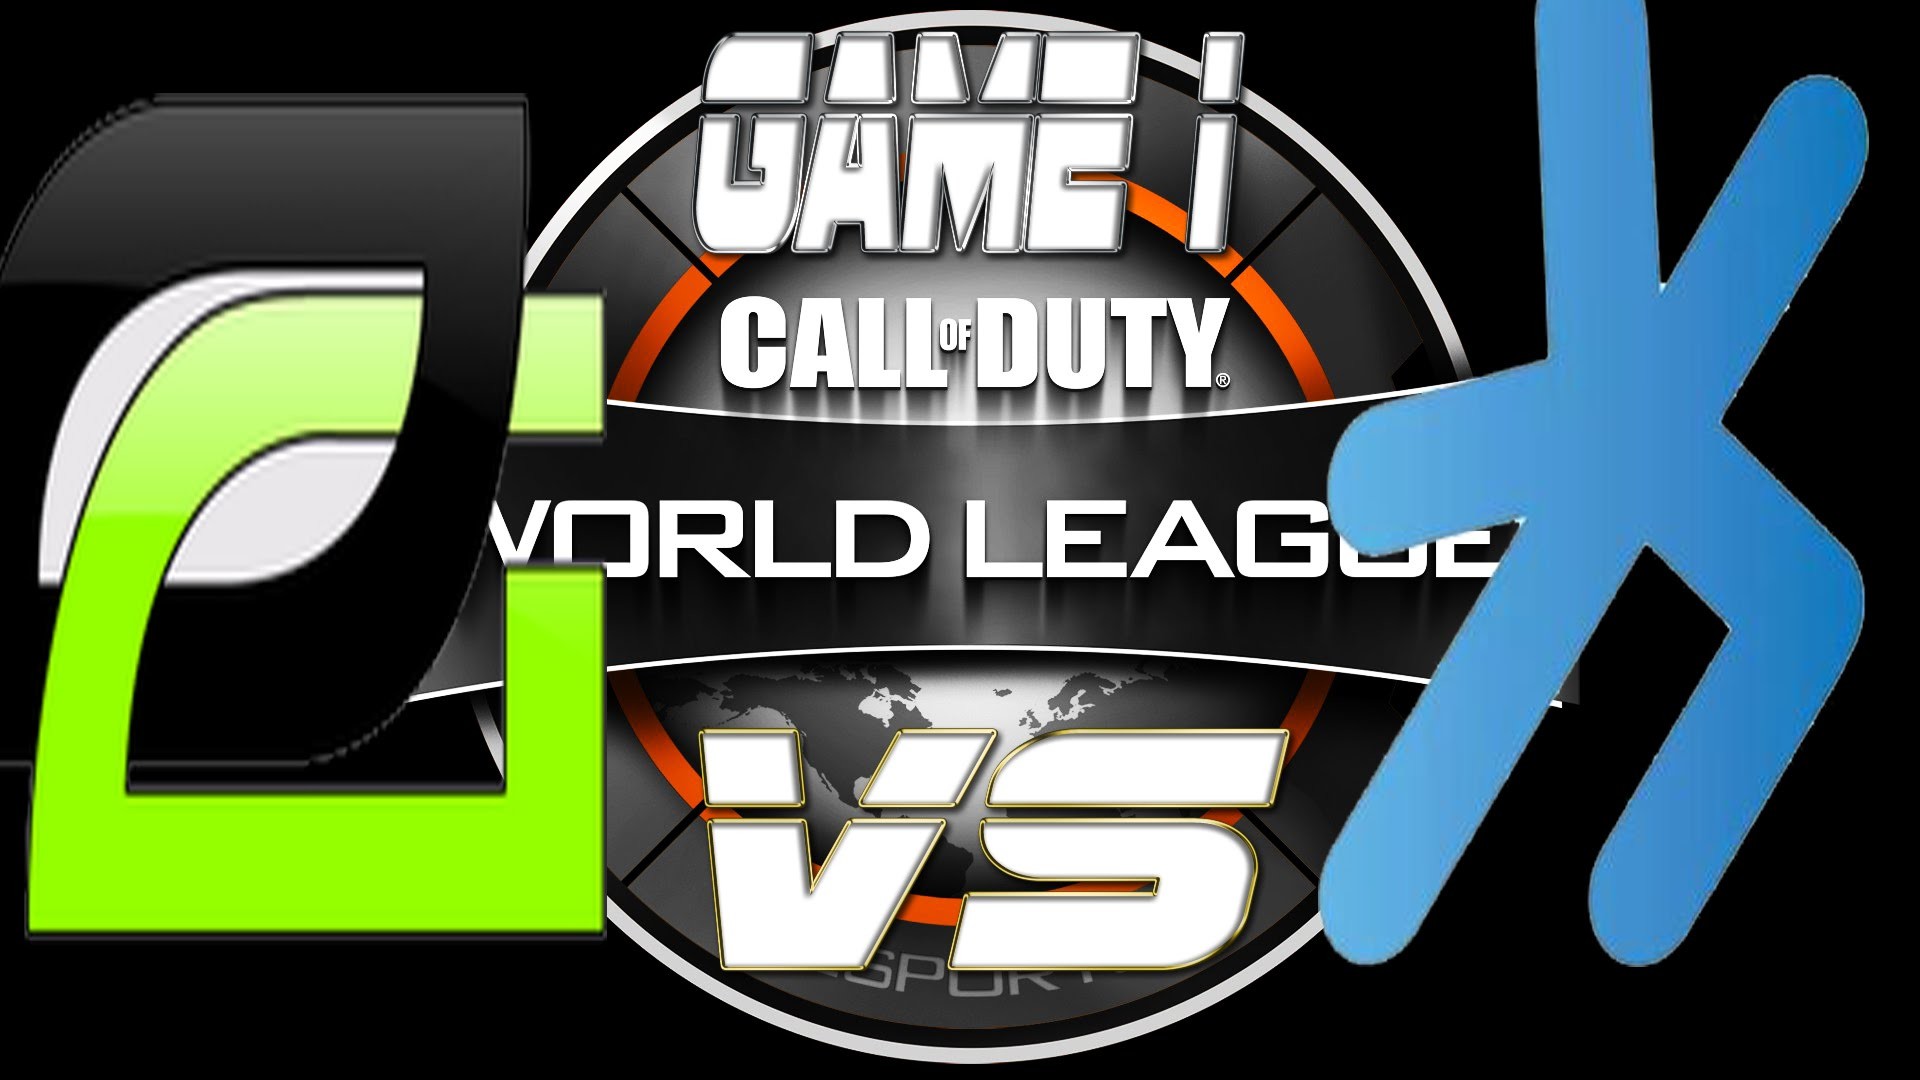 BLACK OPS 3 CWL PRO DIVISION NA OPTIC GAMING VS H2k ESPORTS GAME 1 HARPOINT – YouTube